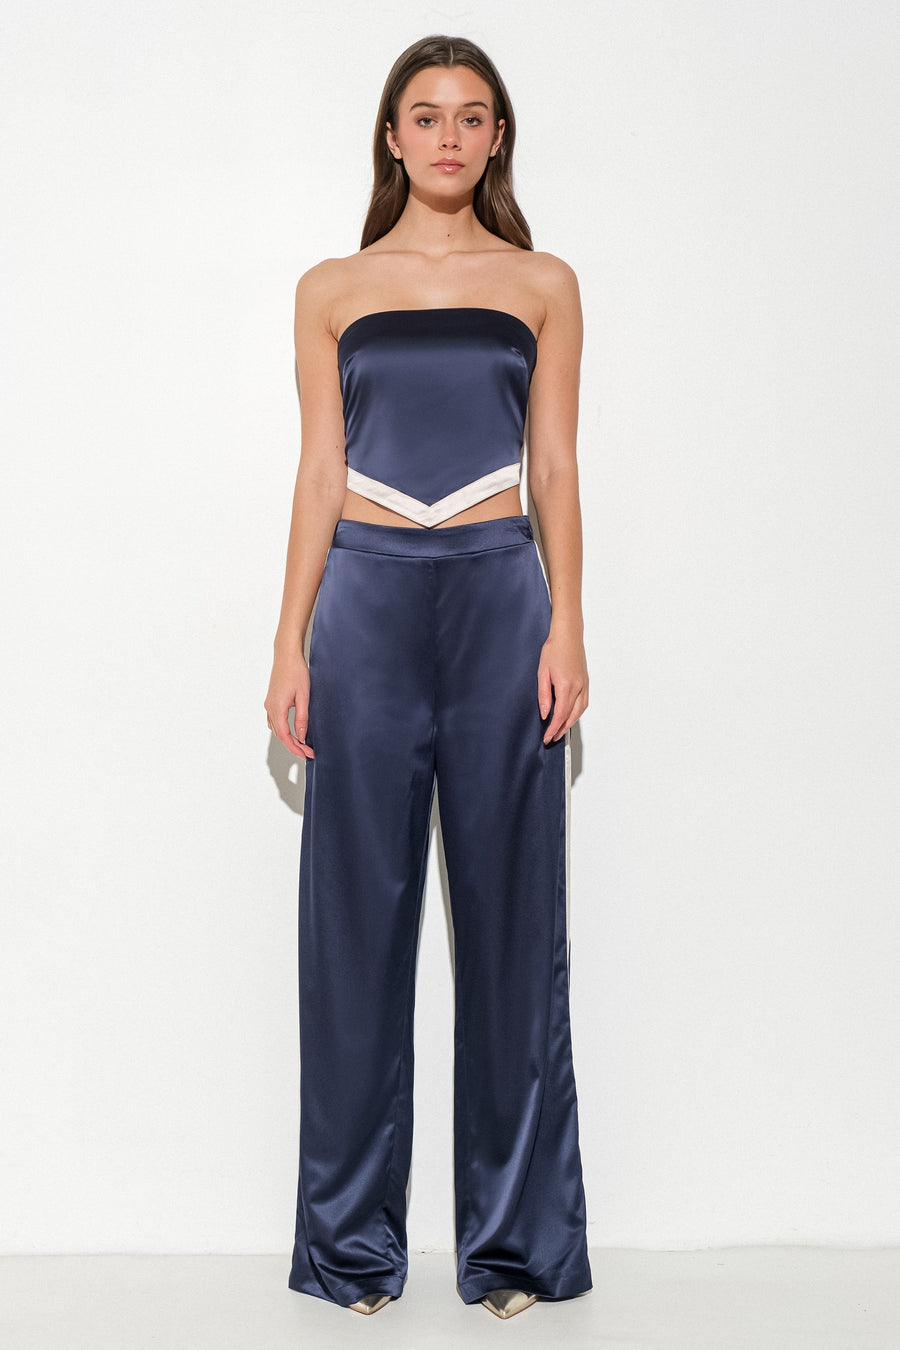 Featuring a loose fit satin pant with a side zipper in the color Navy/Cream